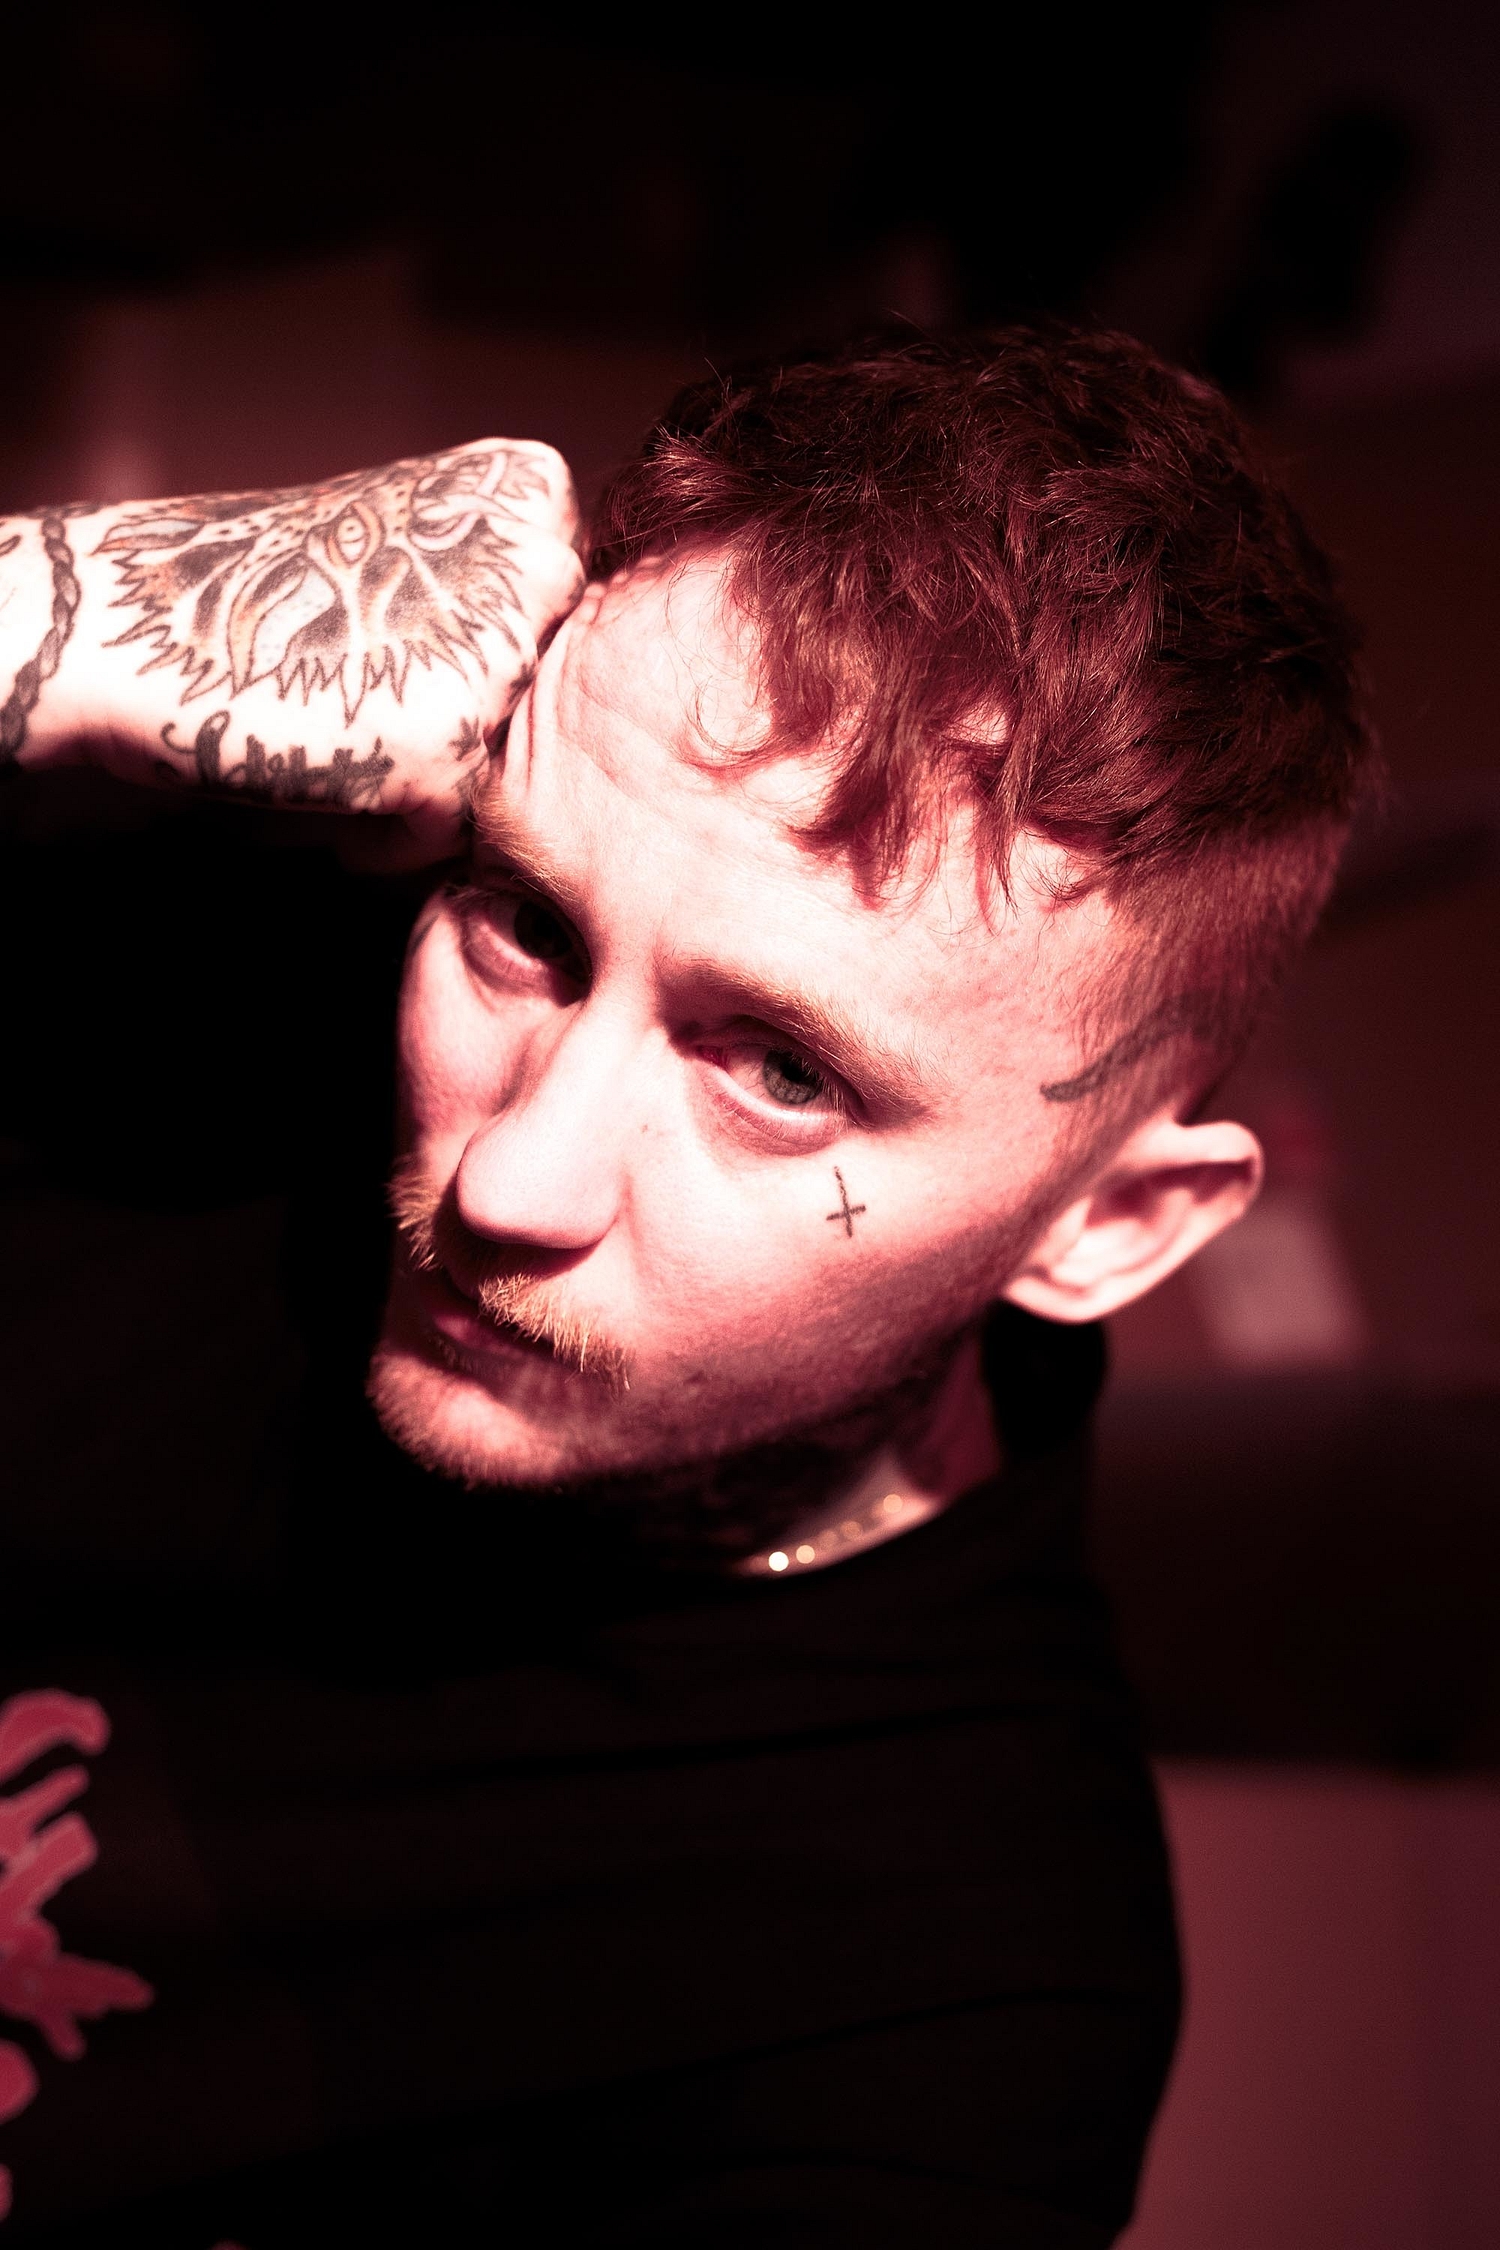 Unite and conquer: Frank Carter & The Rattlesnakes